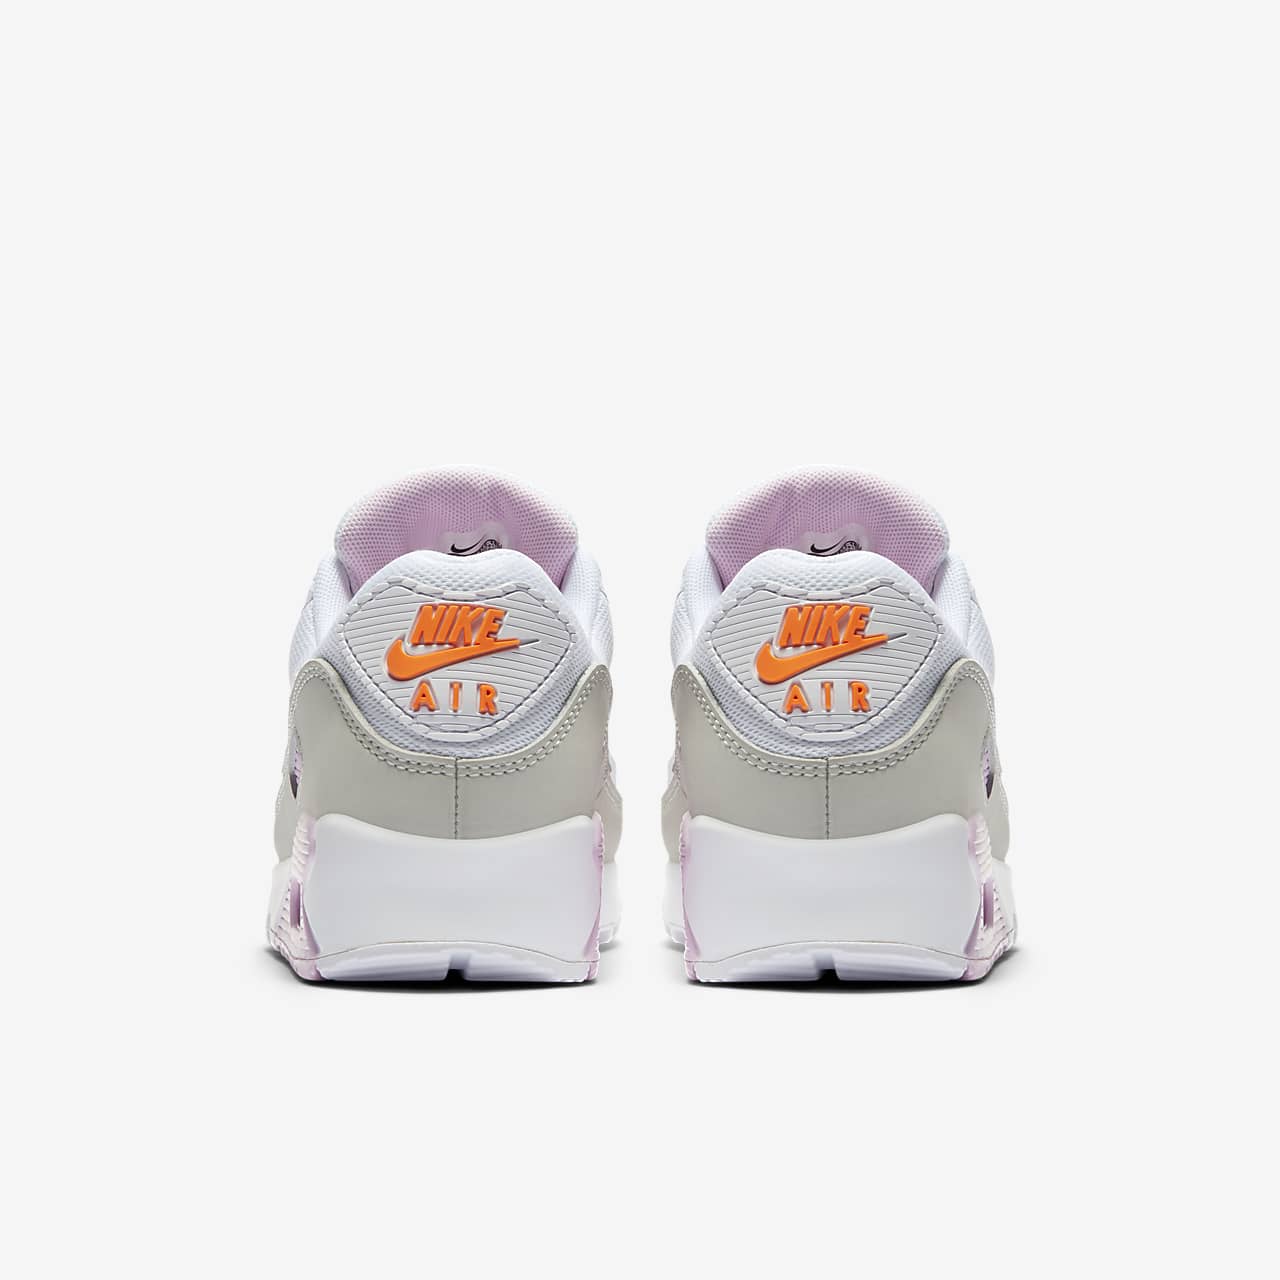 nike air max 90 womens pink and white